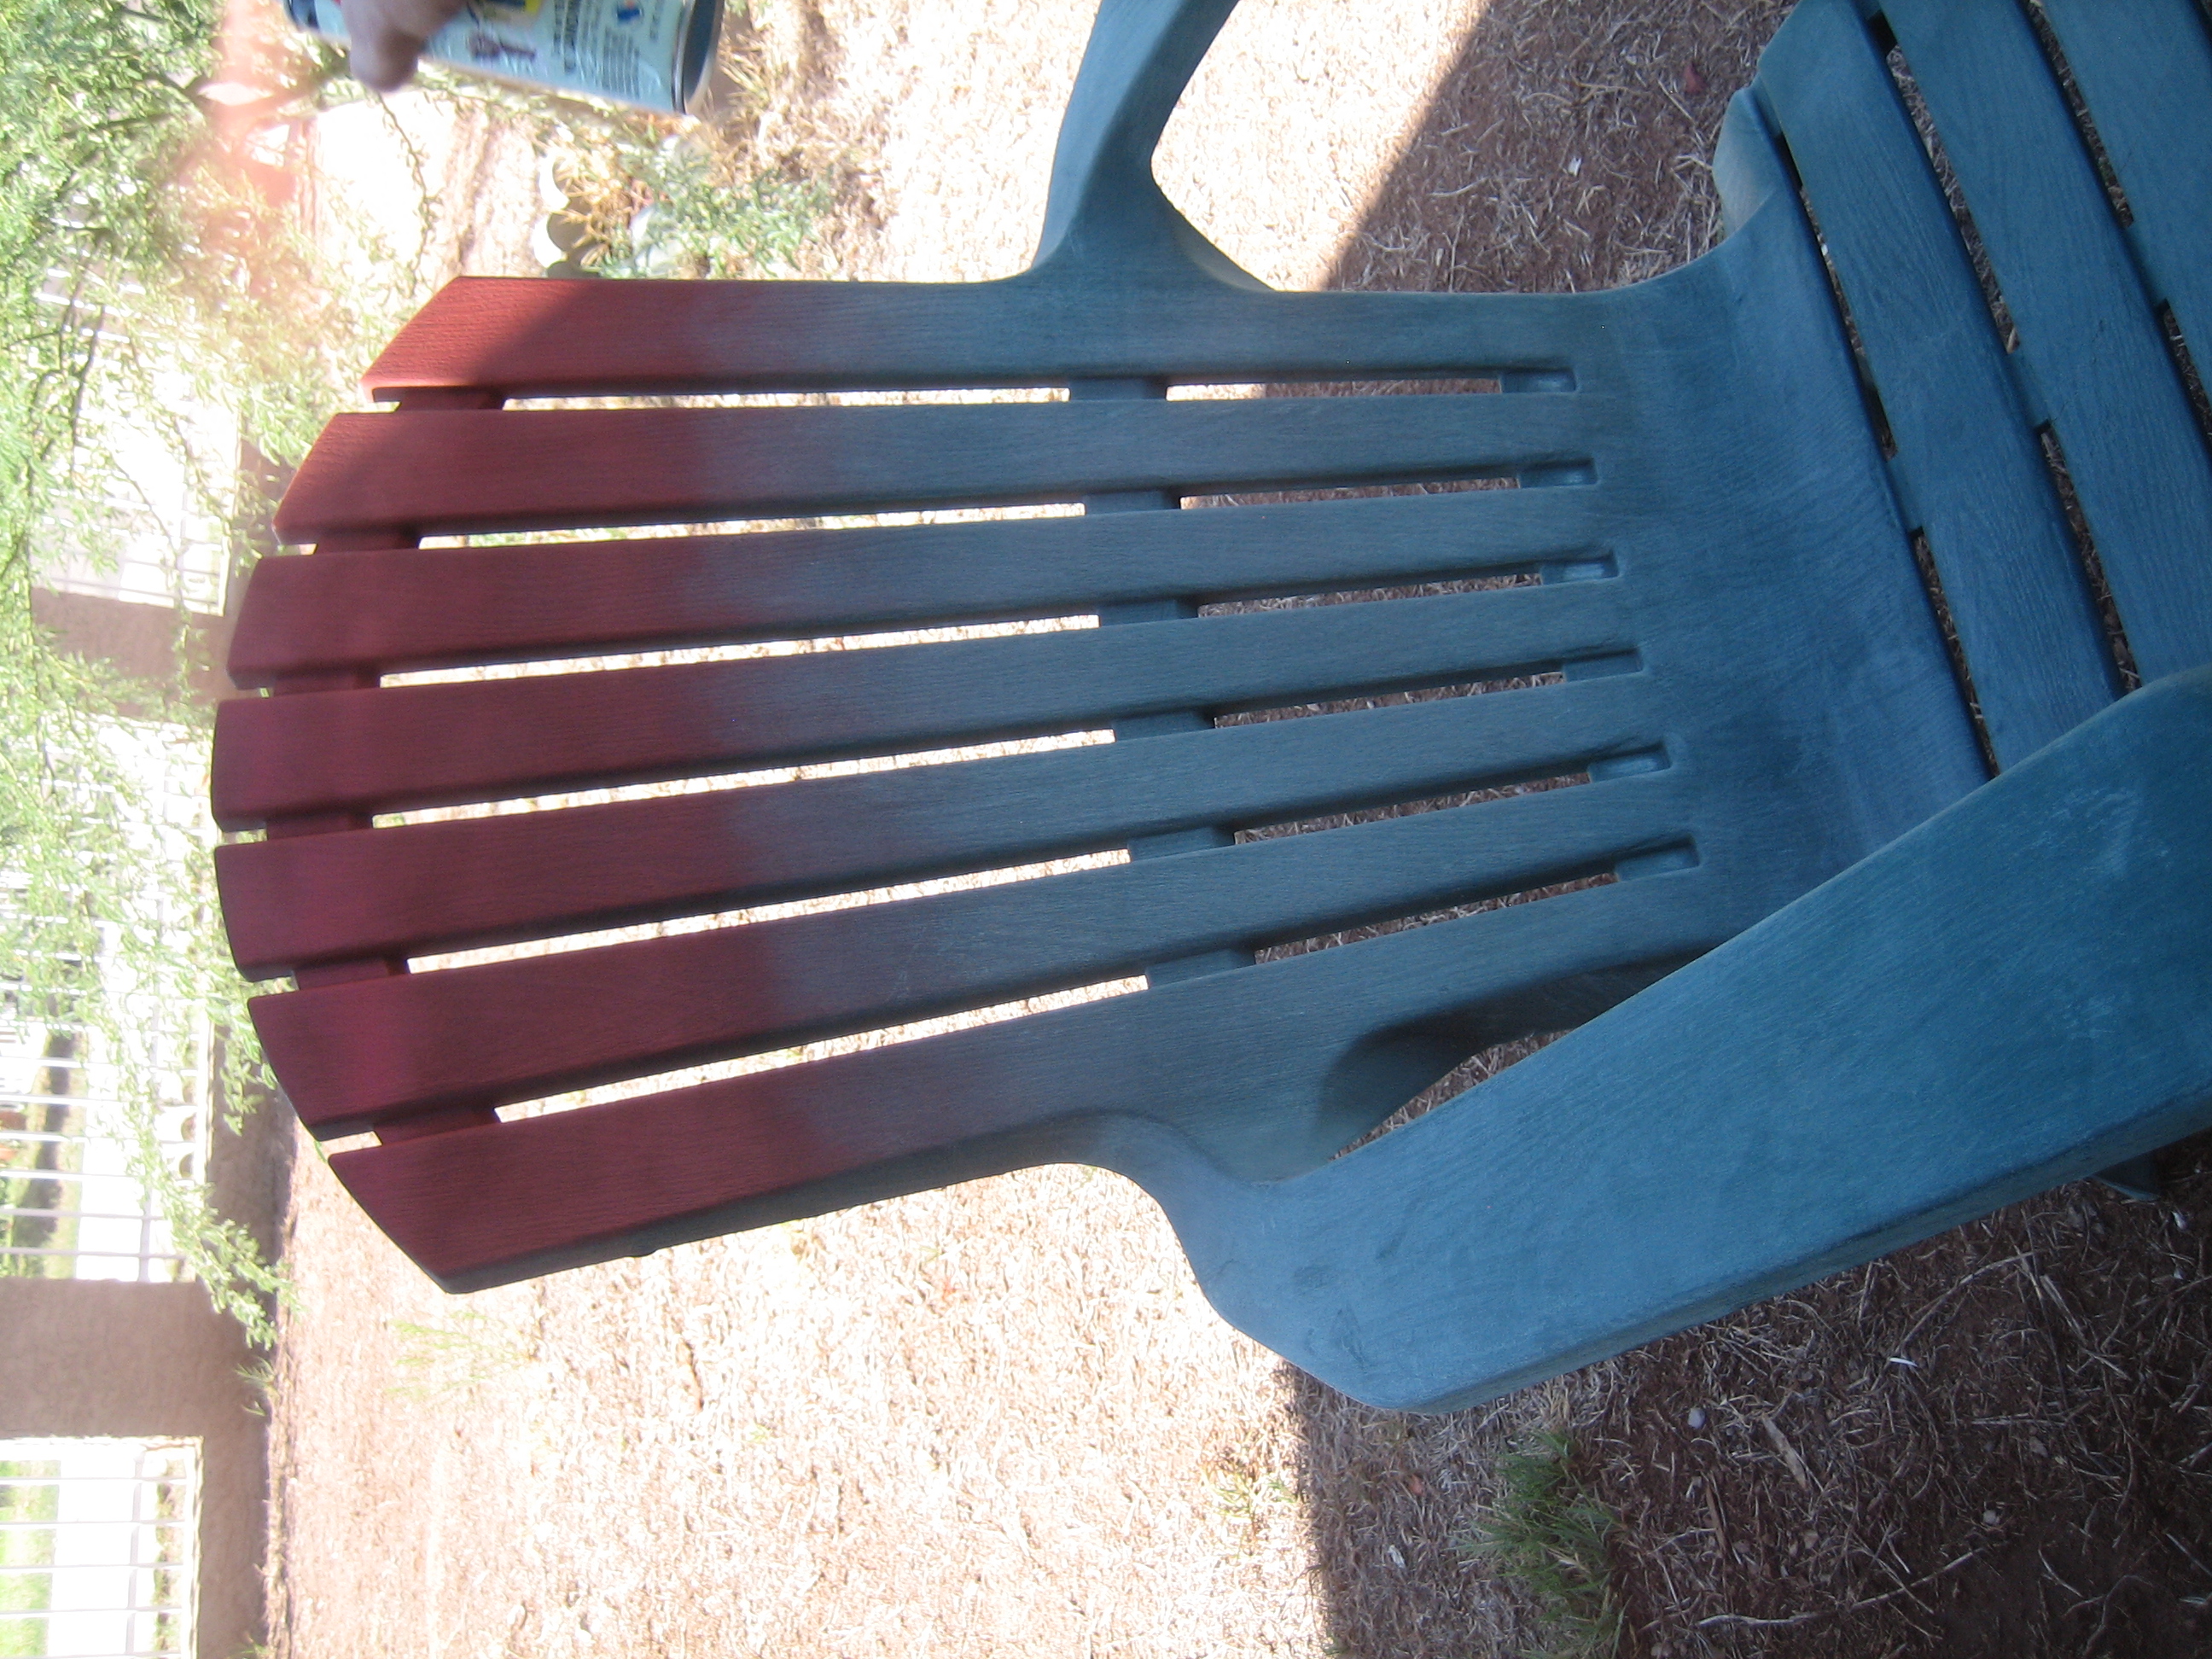 Ugly Plastic Chairs Reclaimed and Made New With Some Love 